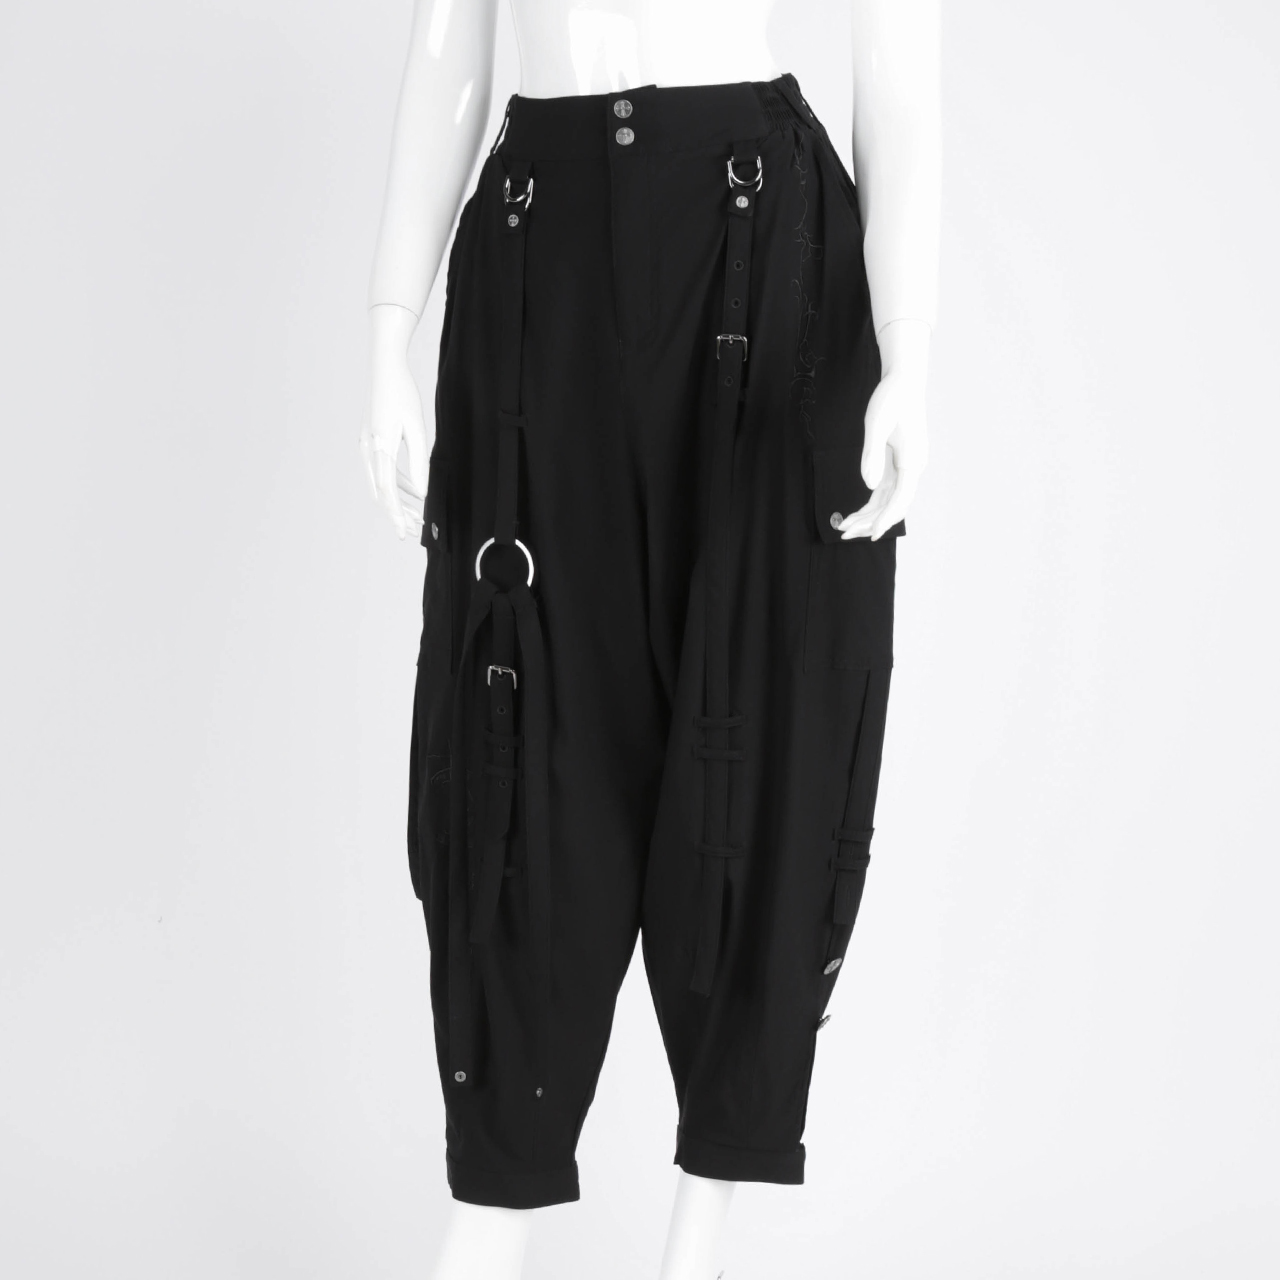 abyss pants 3515703a